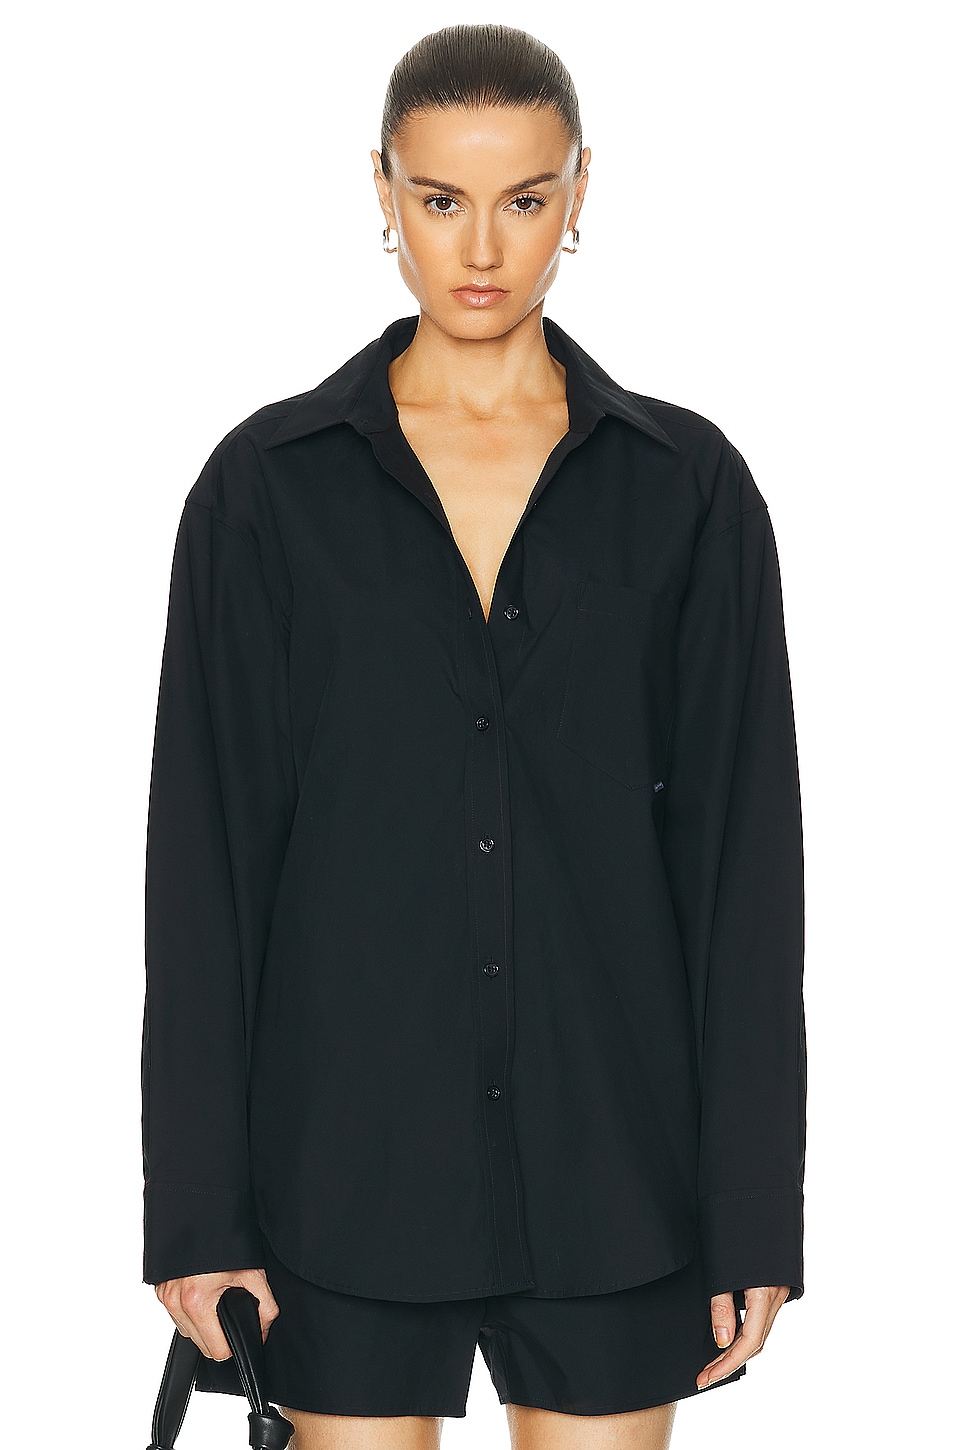 Image 1 of Alexander Wang Boyfriend Button Up Top in Black